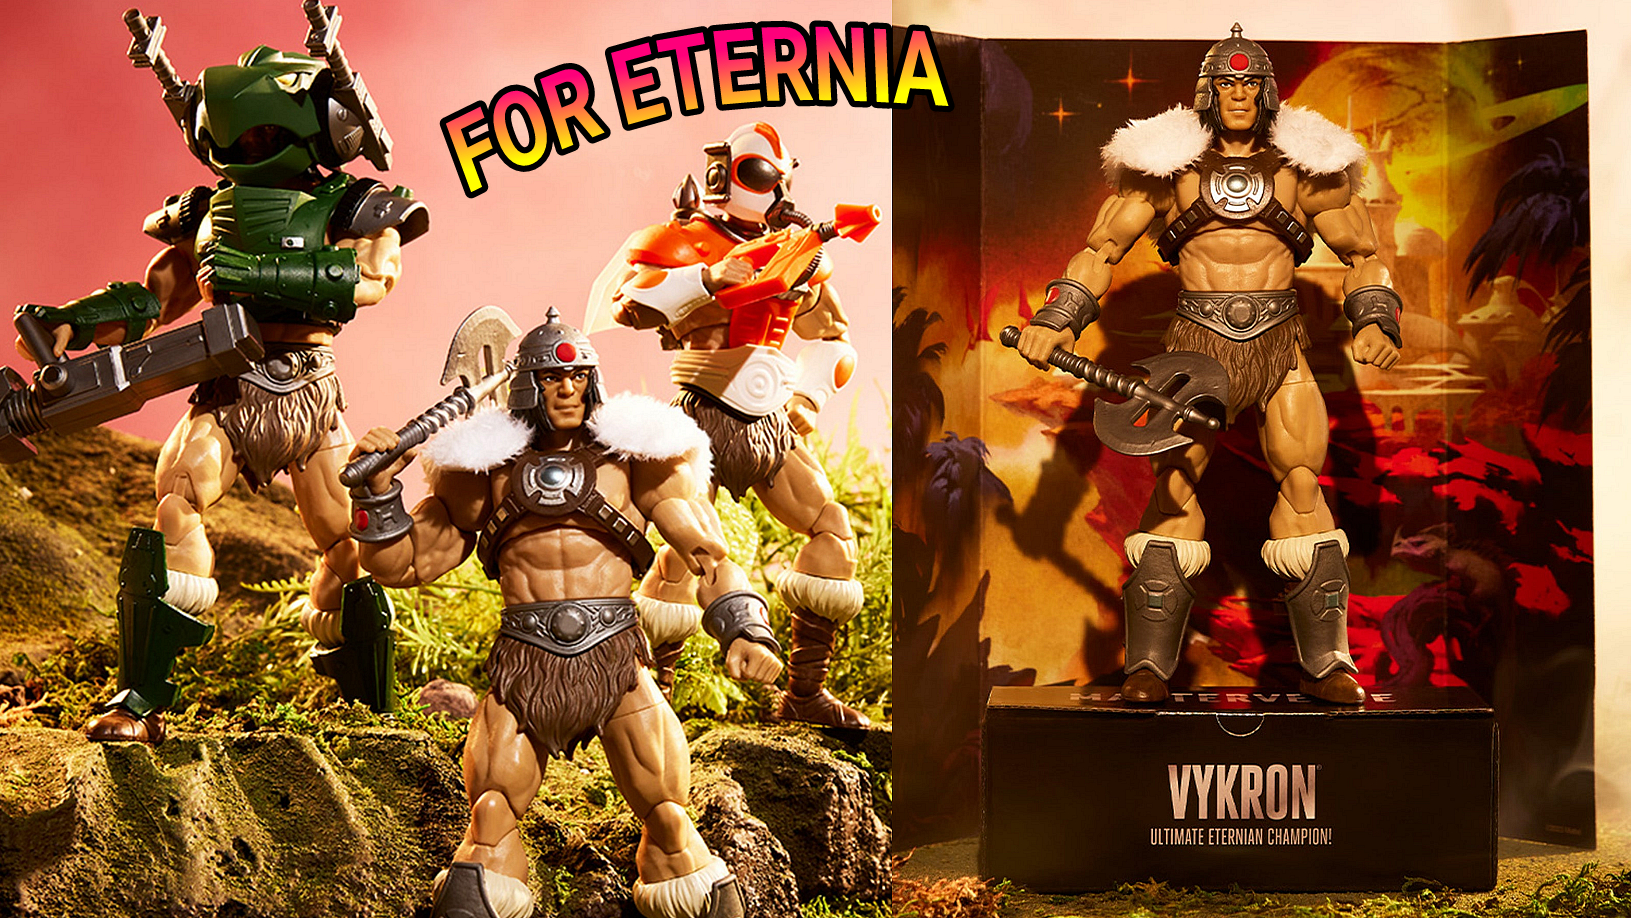 Masterverse New Eternia Vykron info and images released a week before pre-order!